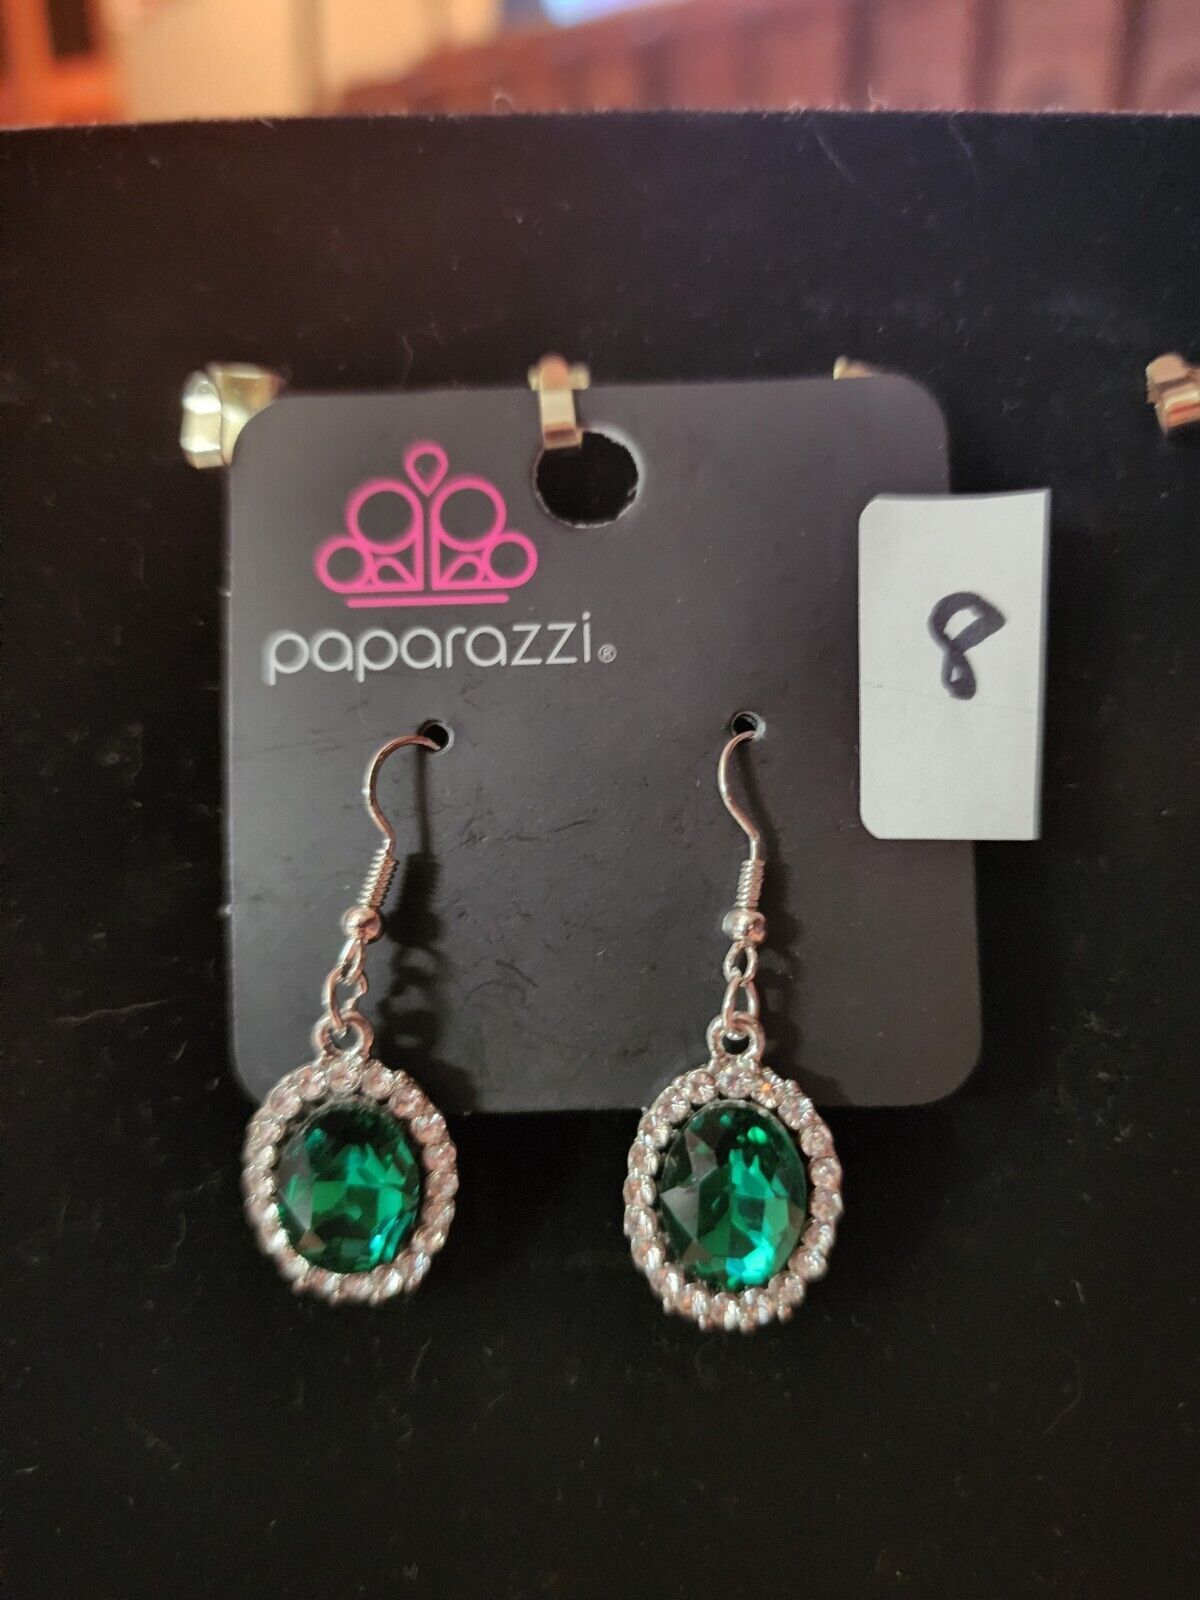 Primary image for Paparazzi The Fame of the Game Earrings   Green and white stones  DISCONTINUED